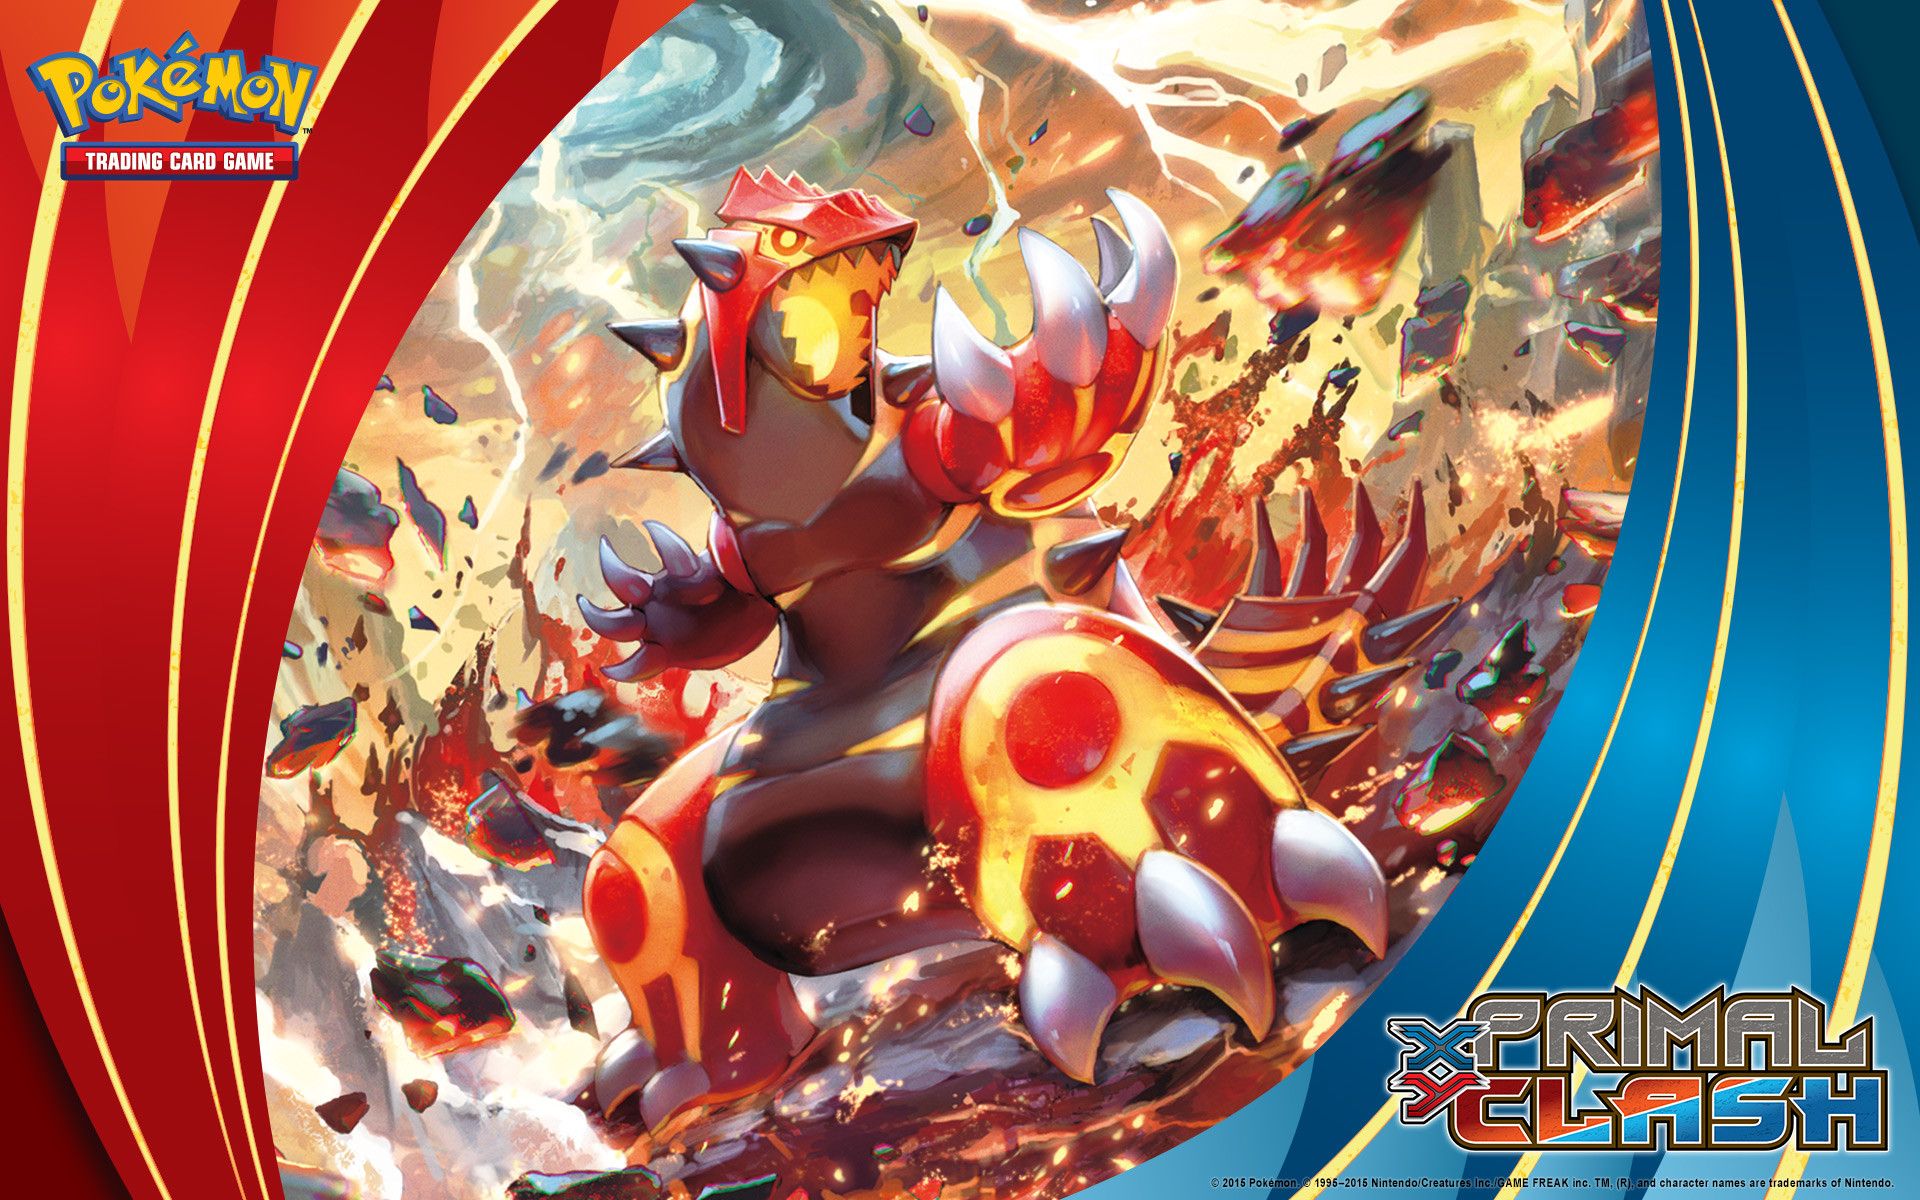 Pokemon - Trading Cards Game Wallpapers